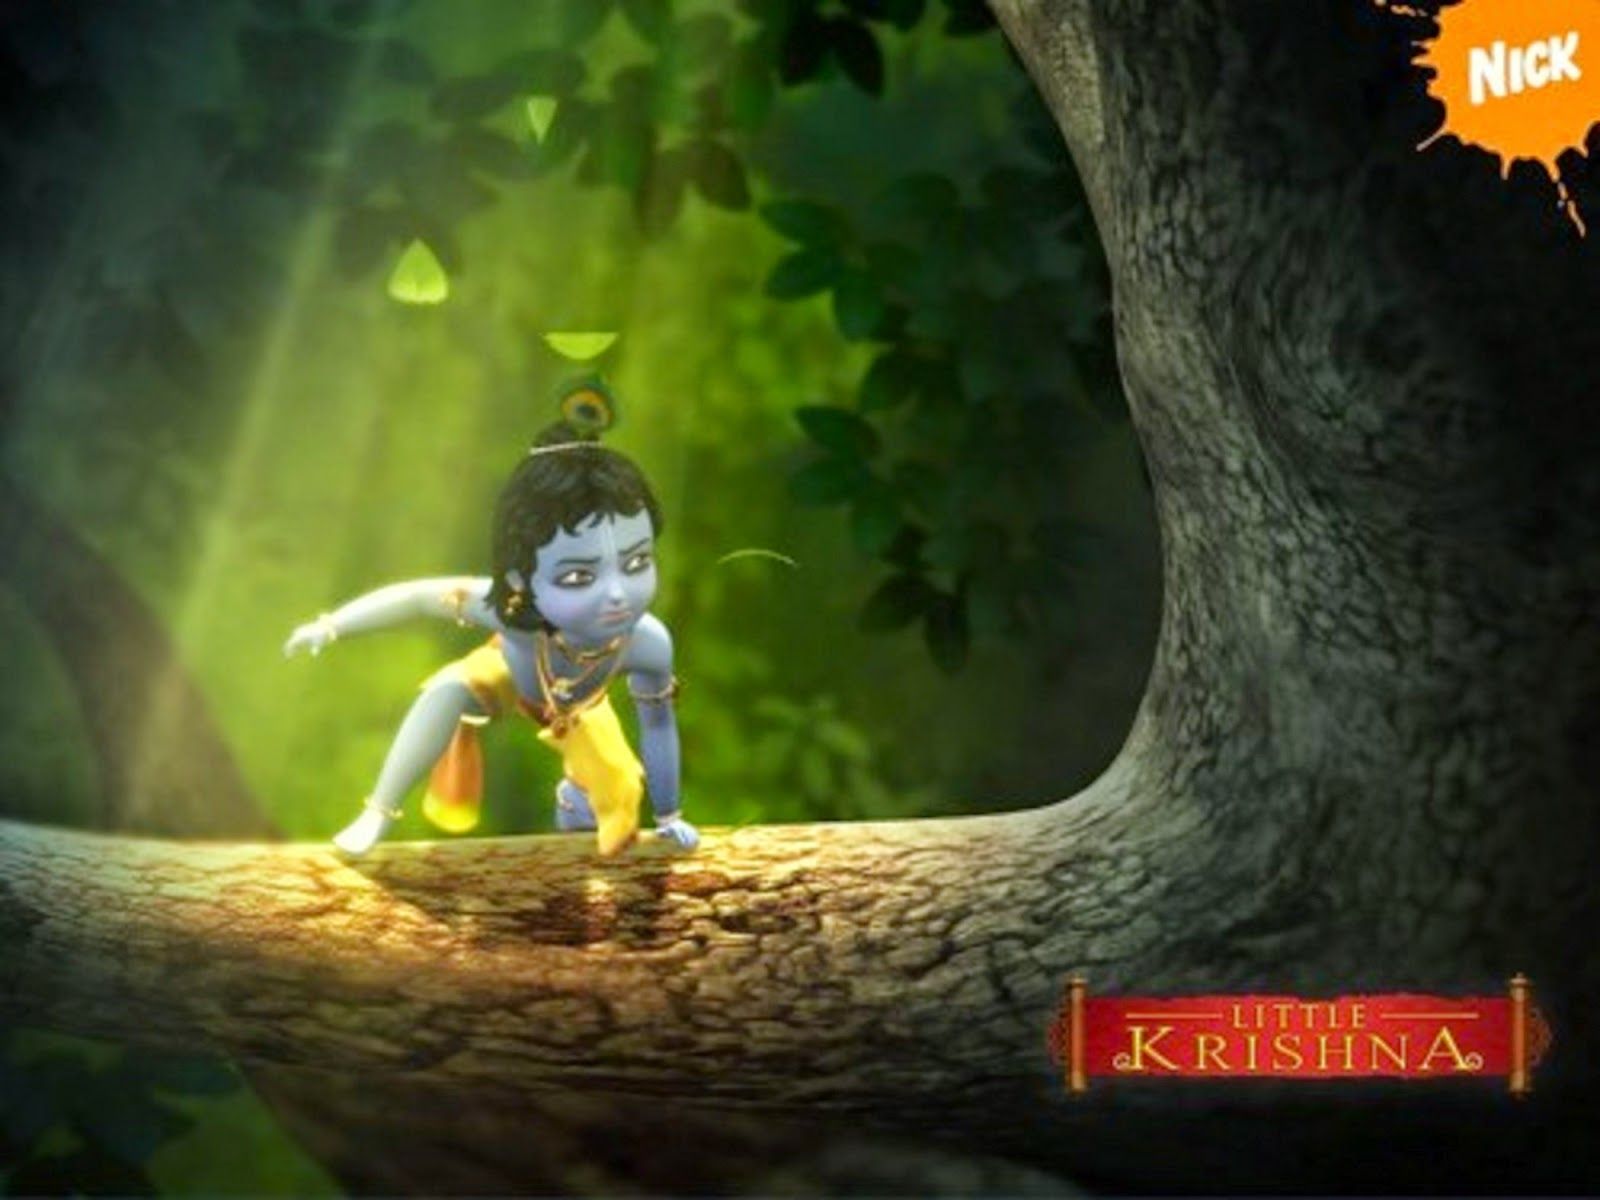 Download and Share Cute Little Krishna Images and Wallpaper